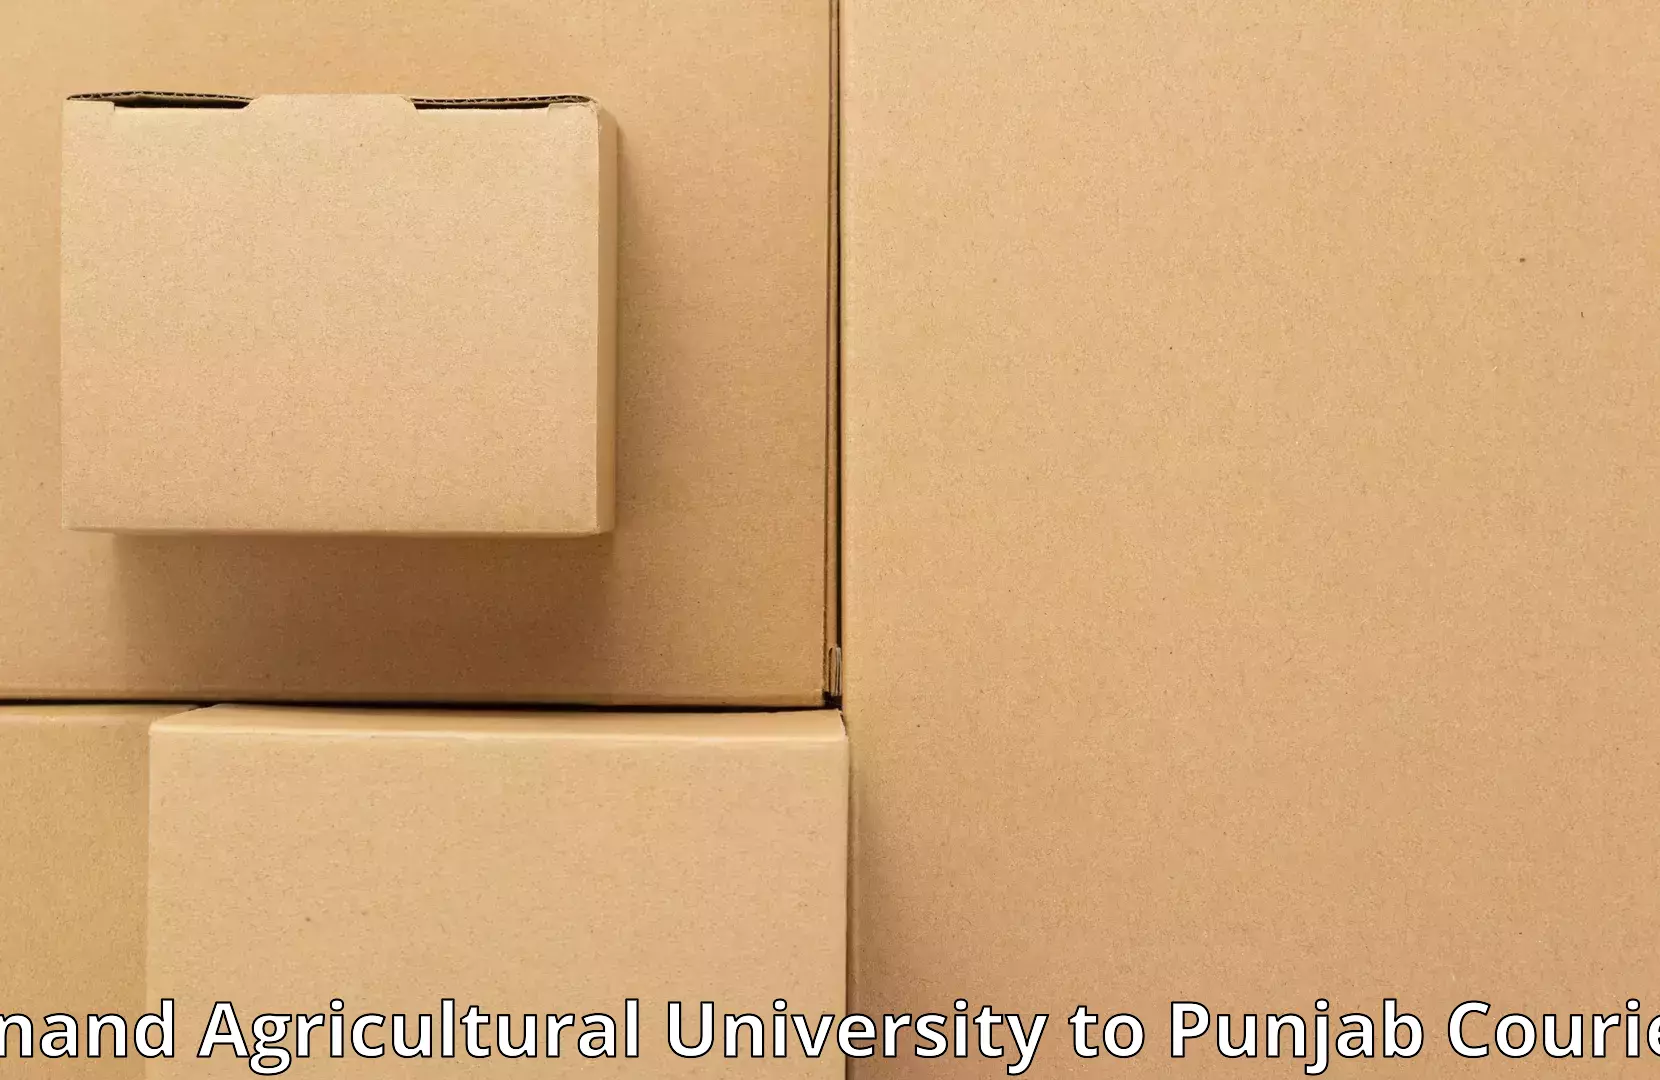 Furniture moving solutions Anand Agricultural University to Nawanshahr